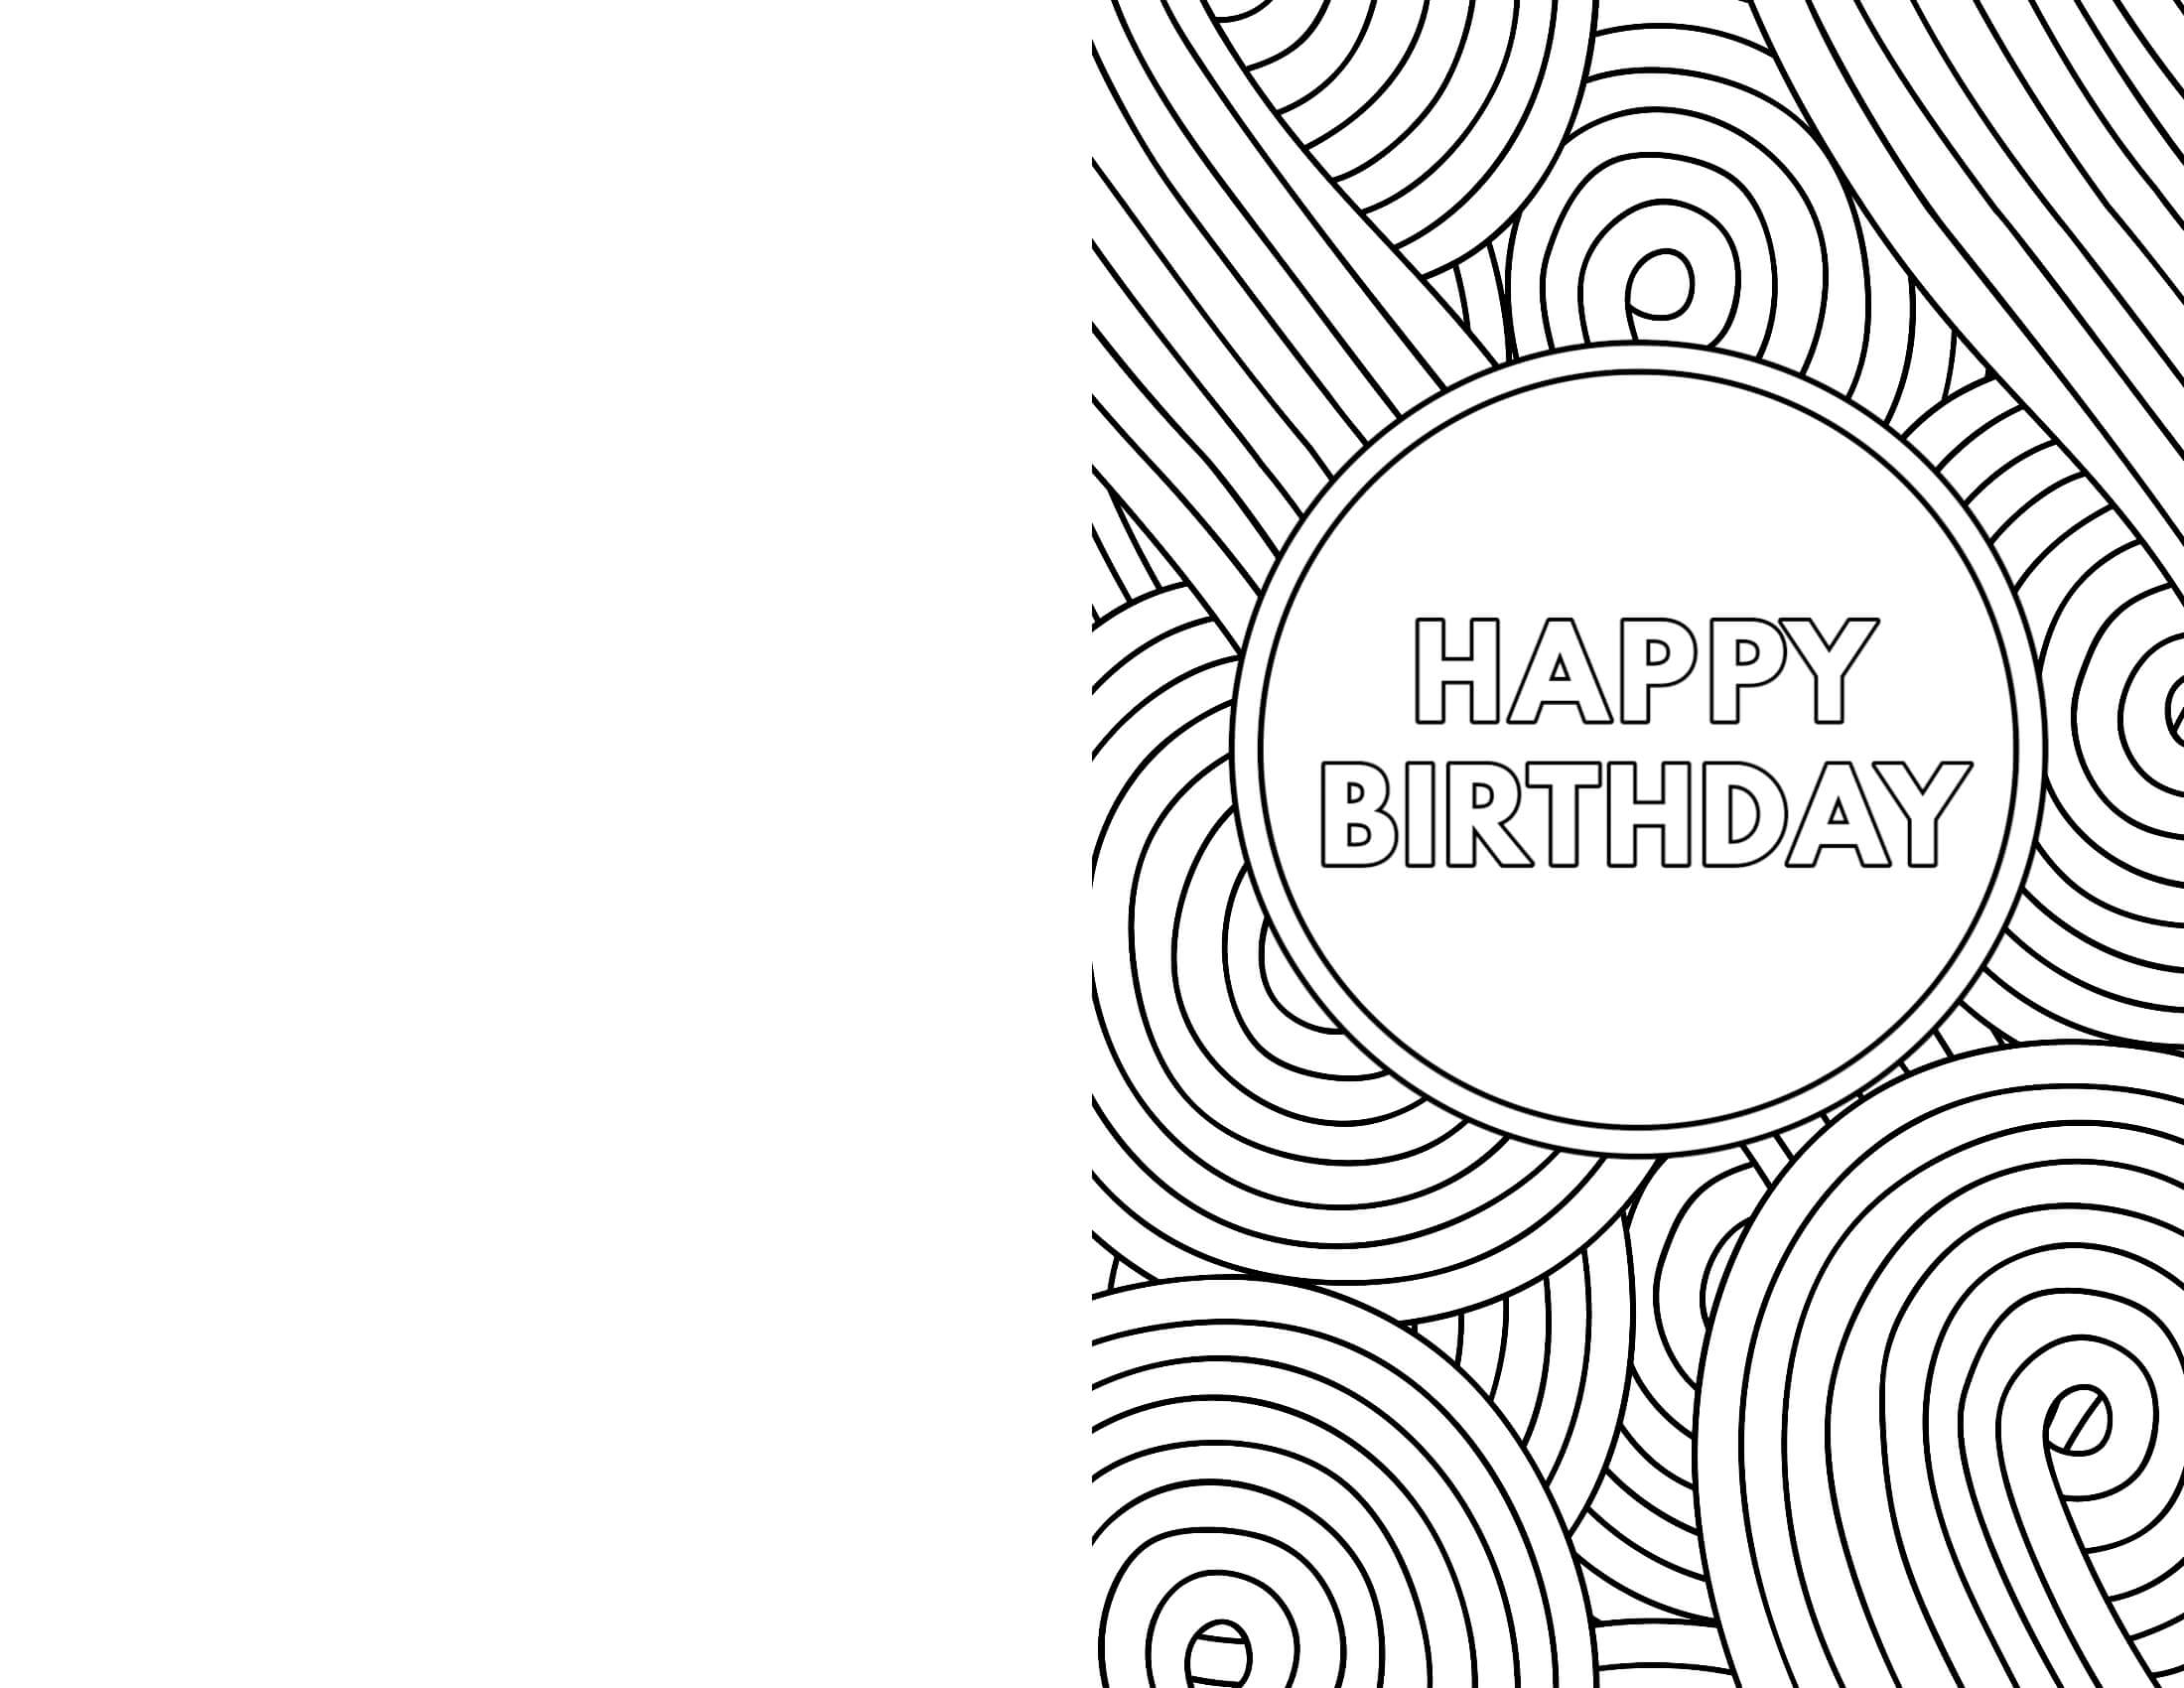 Free Printable Birthday Cards - Paper Trail Design For Foldable Birthday Card Template